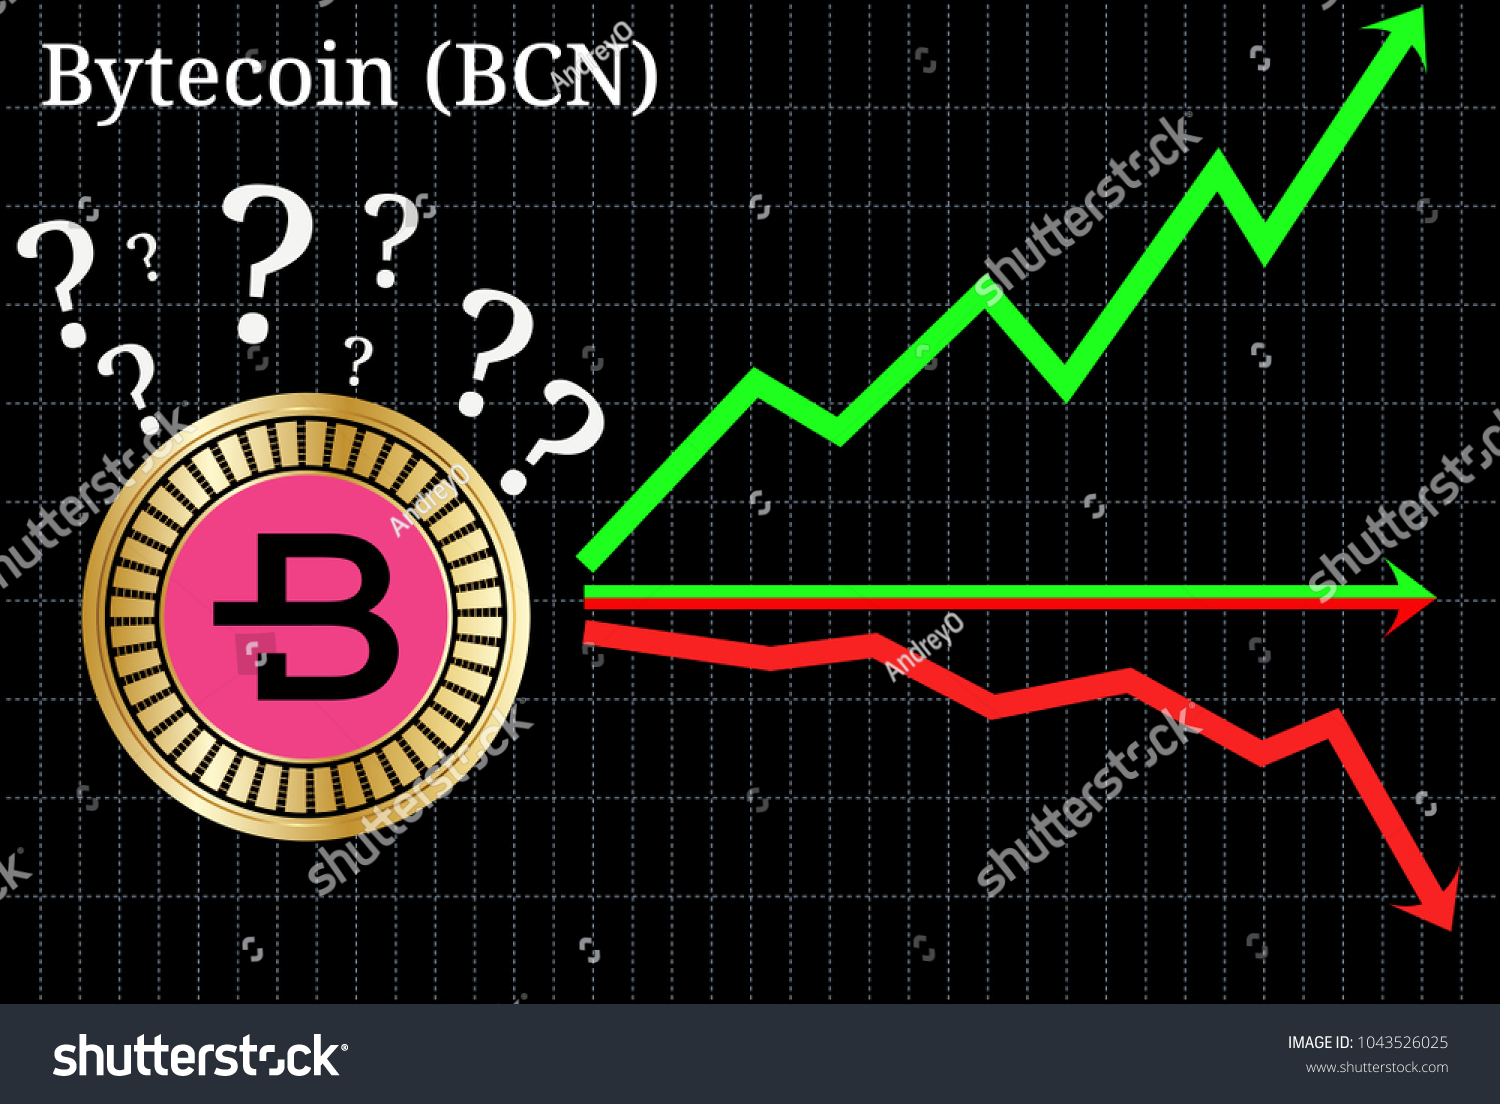 SVG of Possible graphs of forecast Bytecoin (BCN) cryptocurrency - up, down or horizontally. Bytecoin (BCN) chart. svg